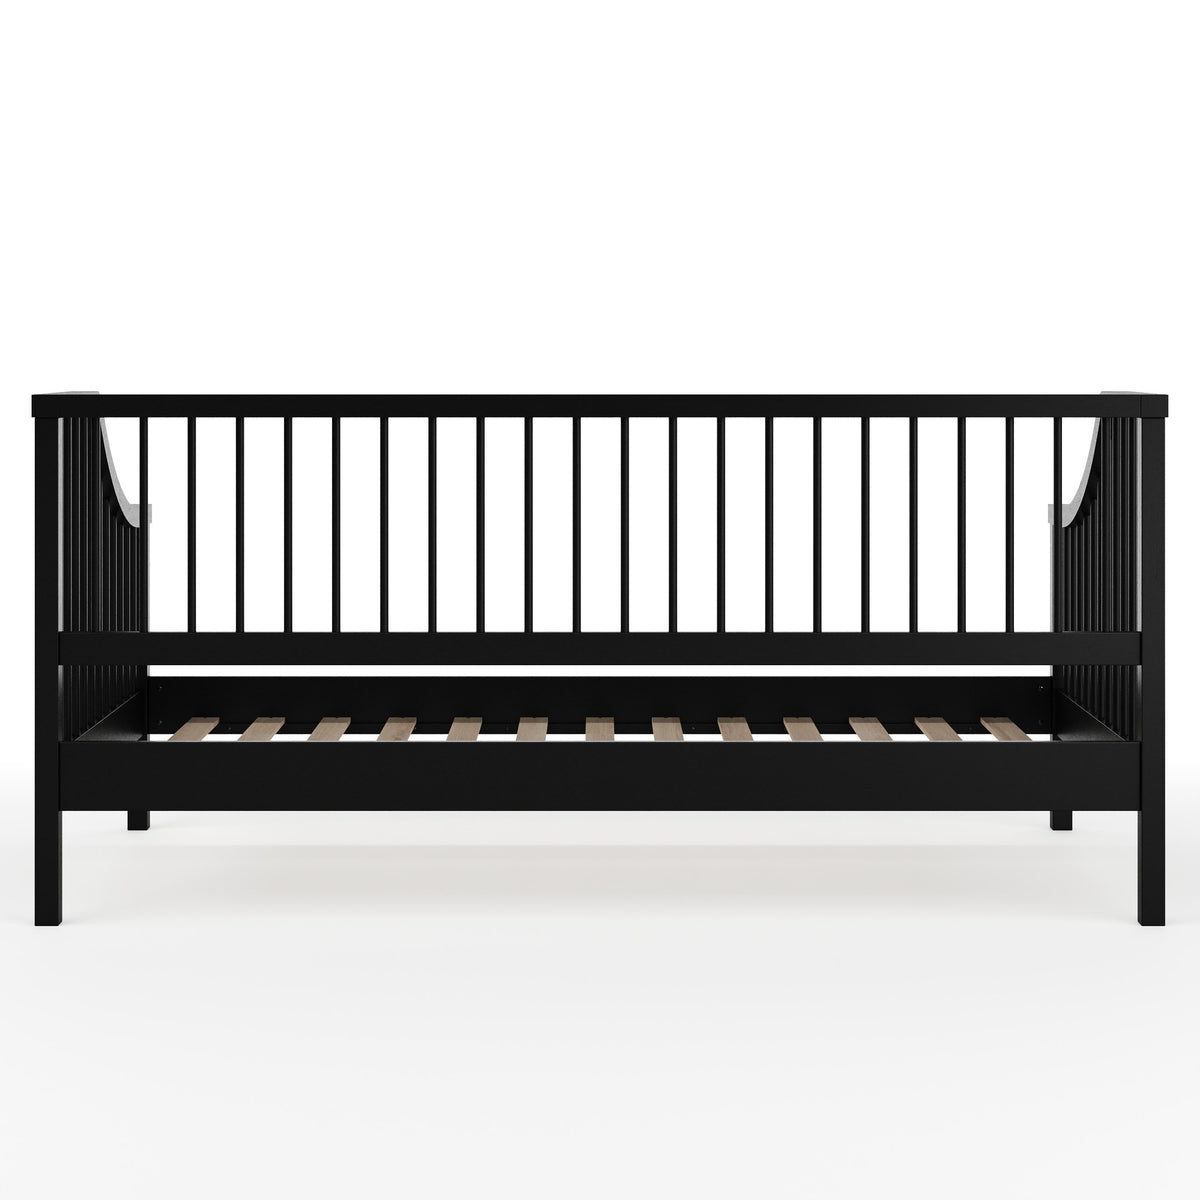 Black |#| Wooden Twin Size Platform Daybed with Spindles and Wood Slat Foundation in Black